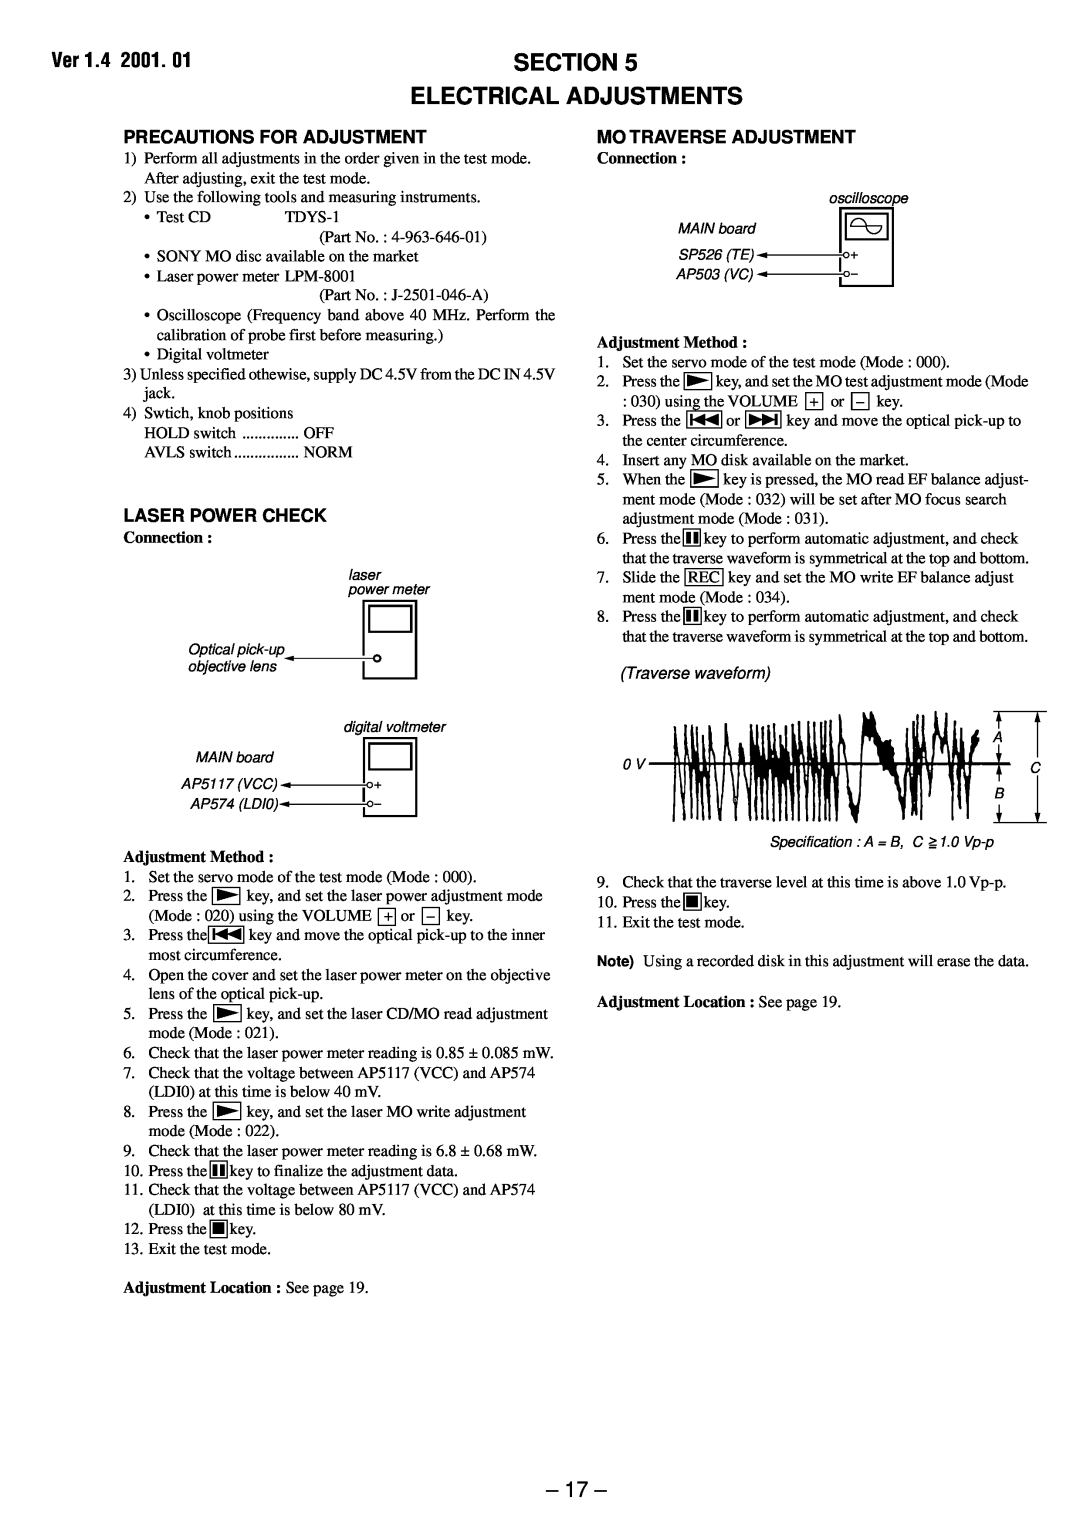 Sony MZ-R37 specifications Section Electrical Adjustments, 17, Ver 1.4 2001, Precautions For Adjustment, Laser Power Check 